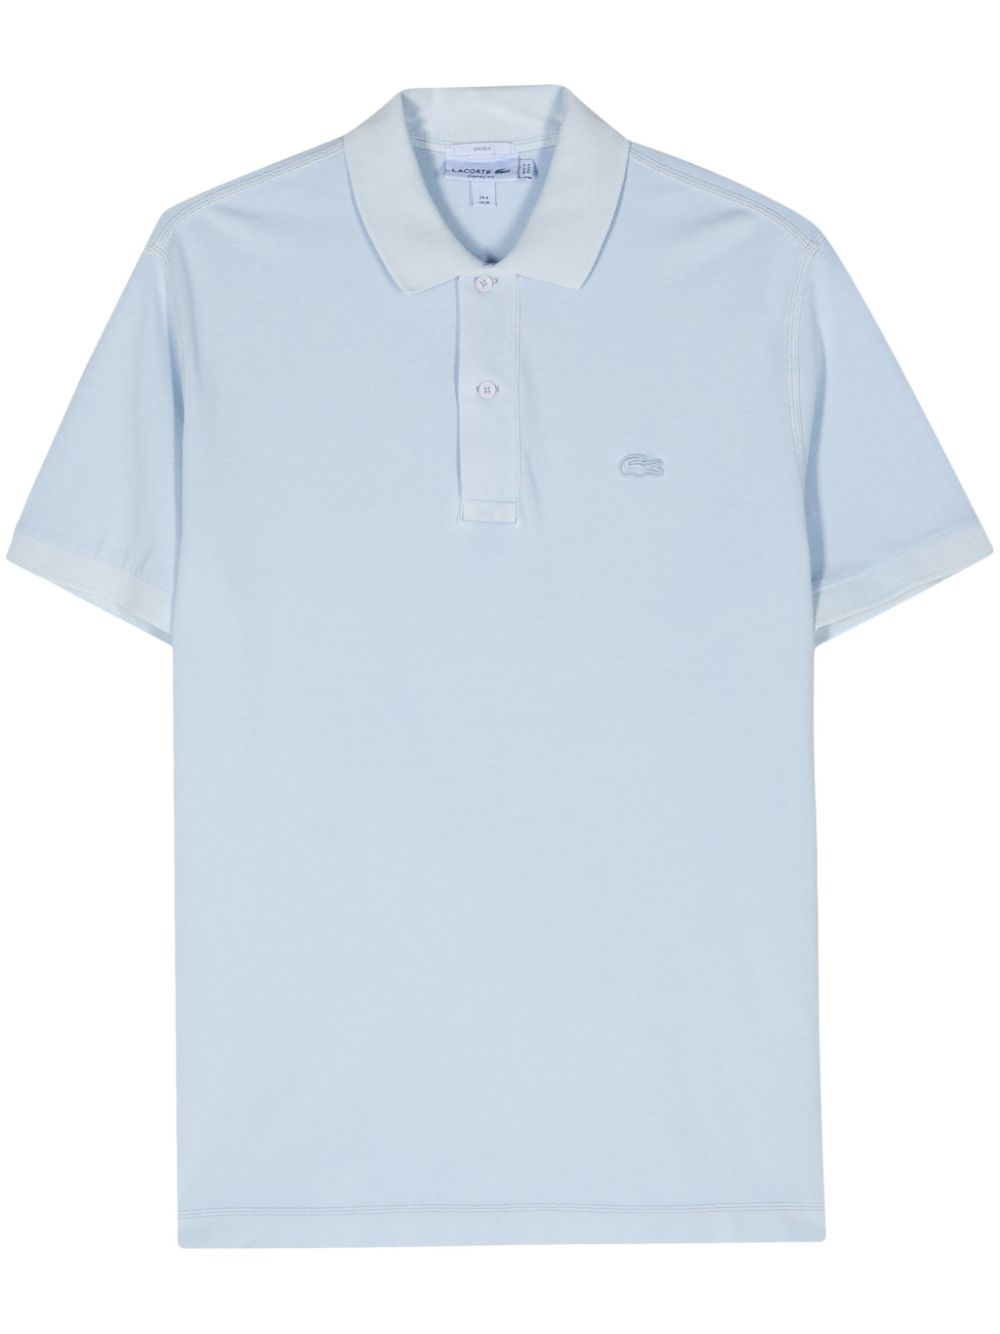 Lacoste 标贴珠地布polo衫 In Blue